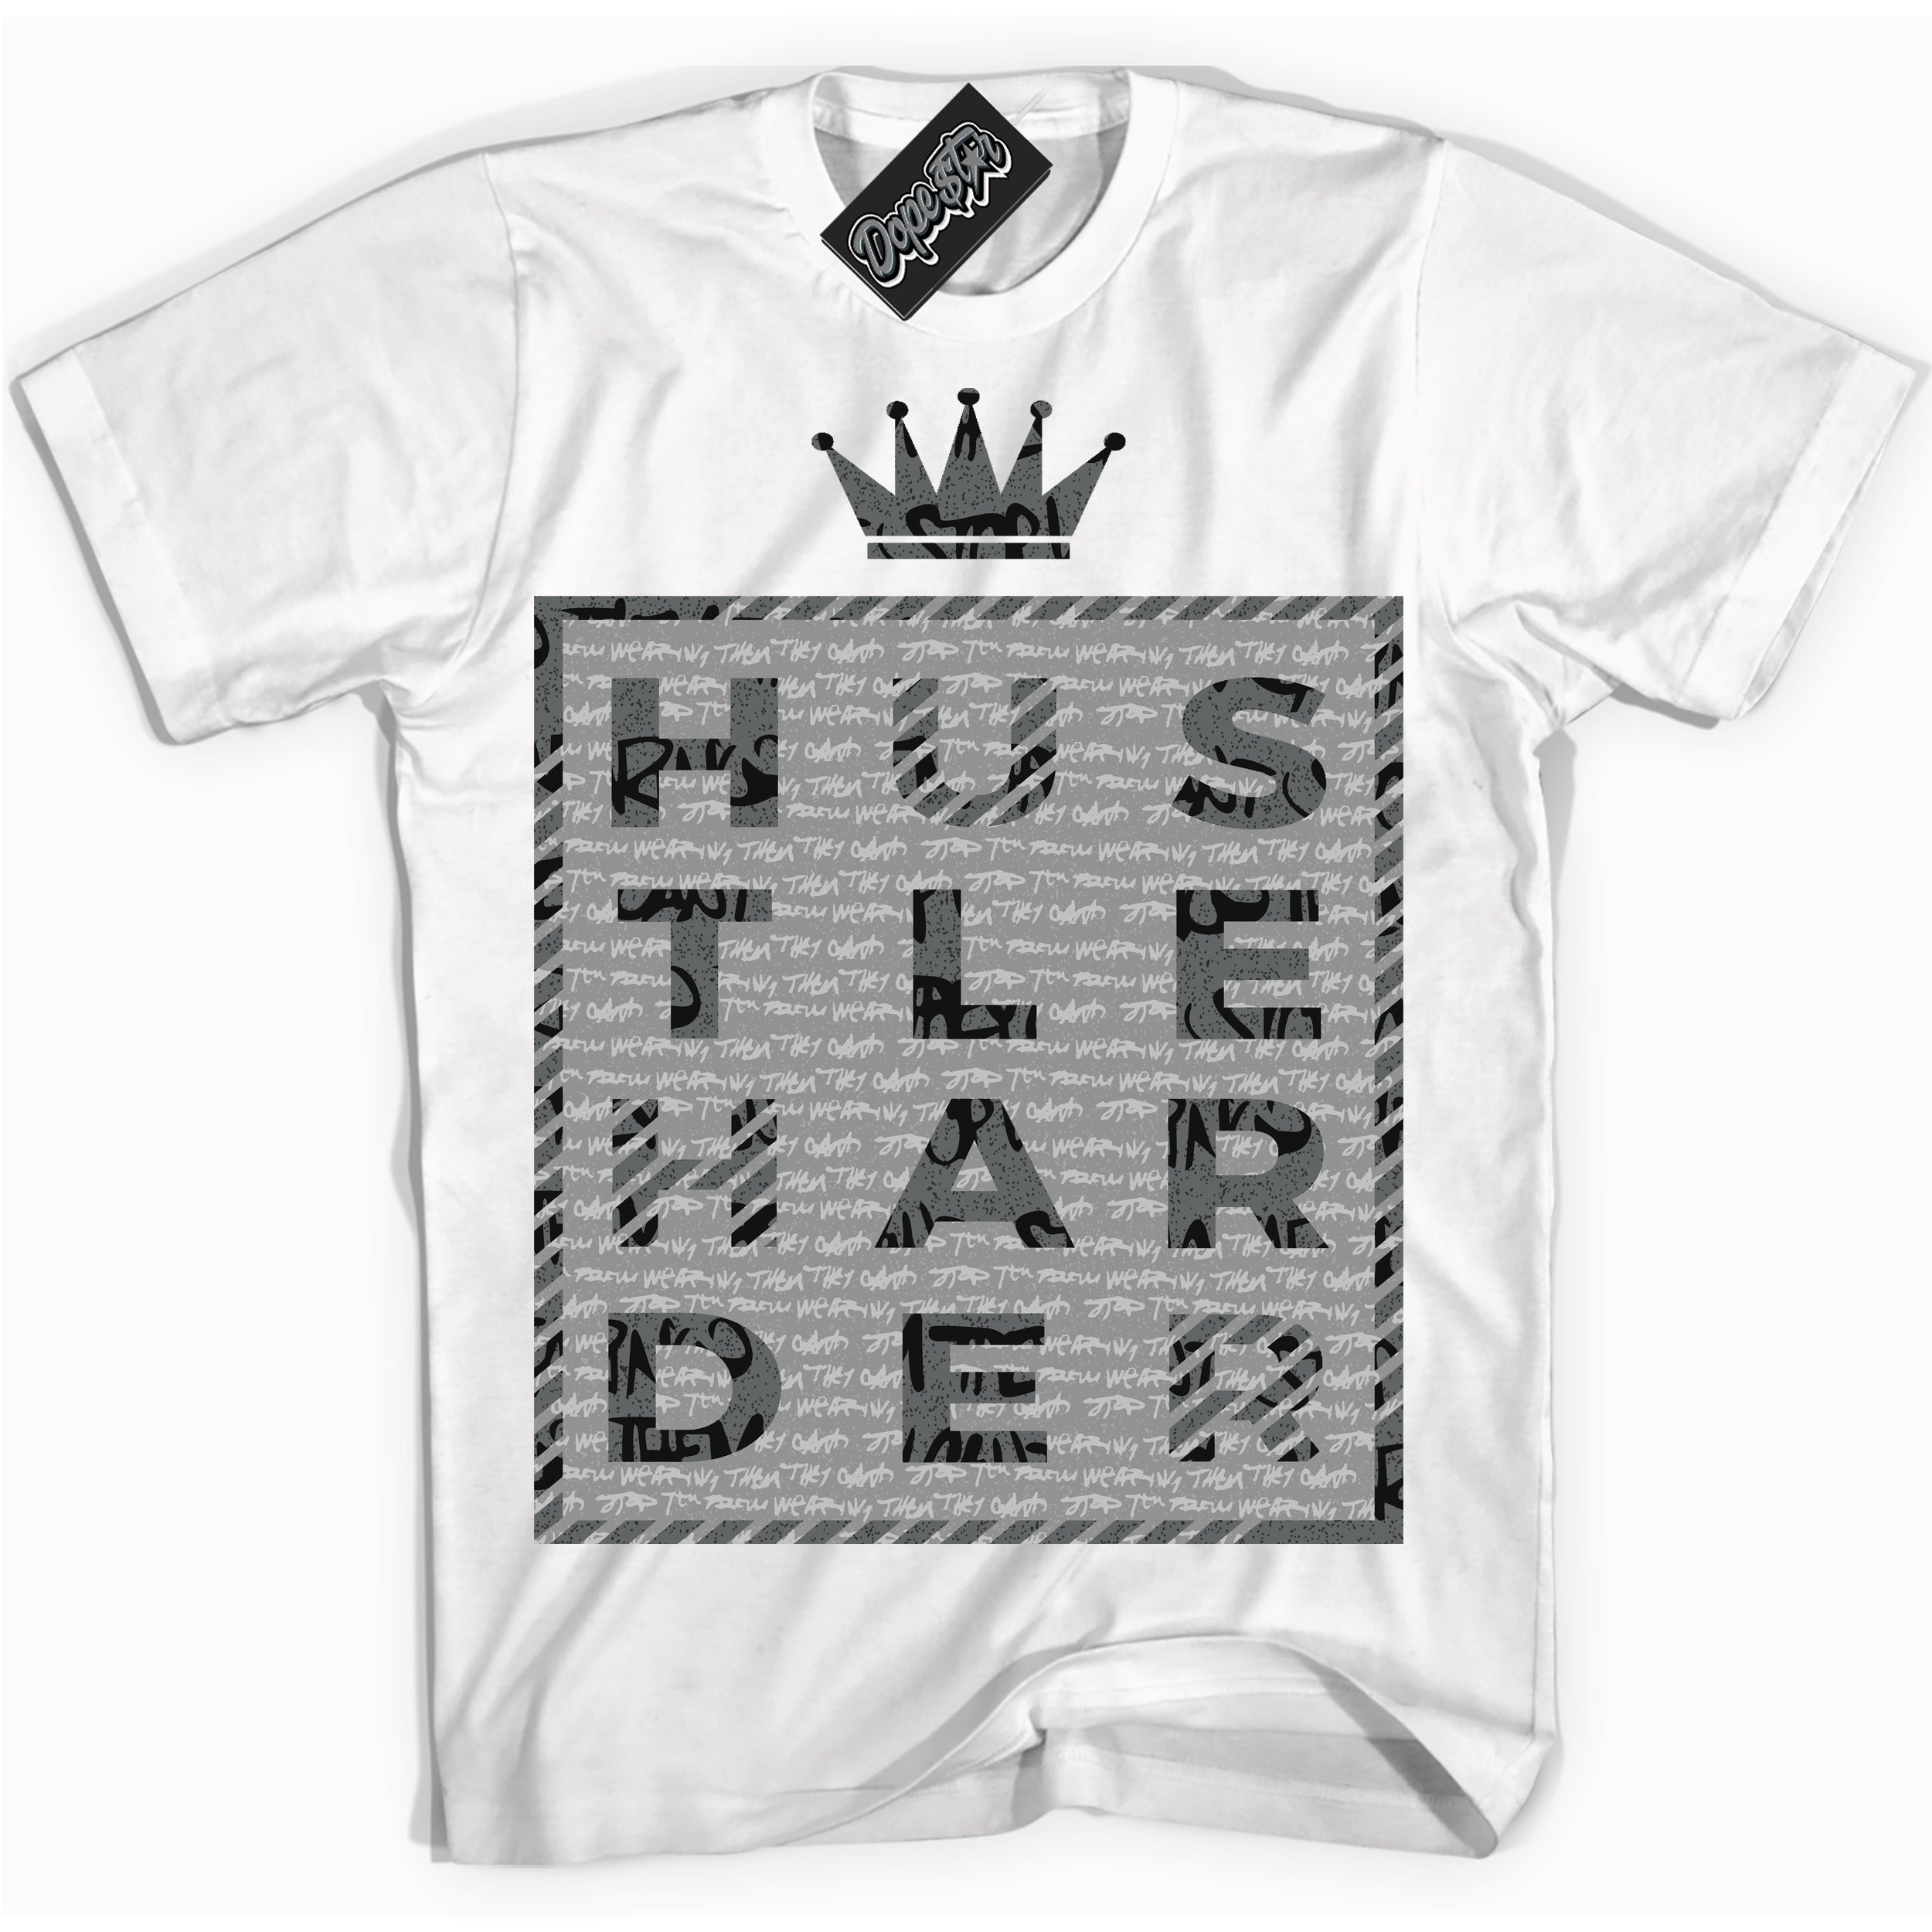 Cool White Shirt with “ Hustle Harder ” design that perfectly matches Rebellionaire 1s Sneakers.